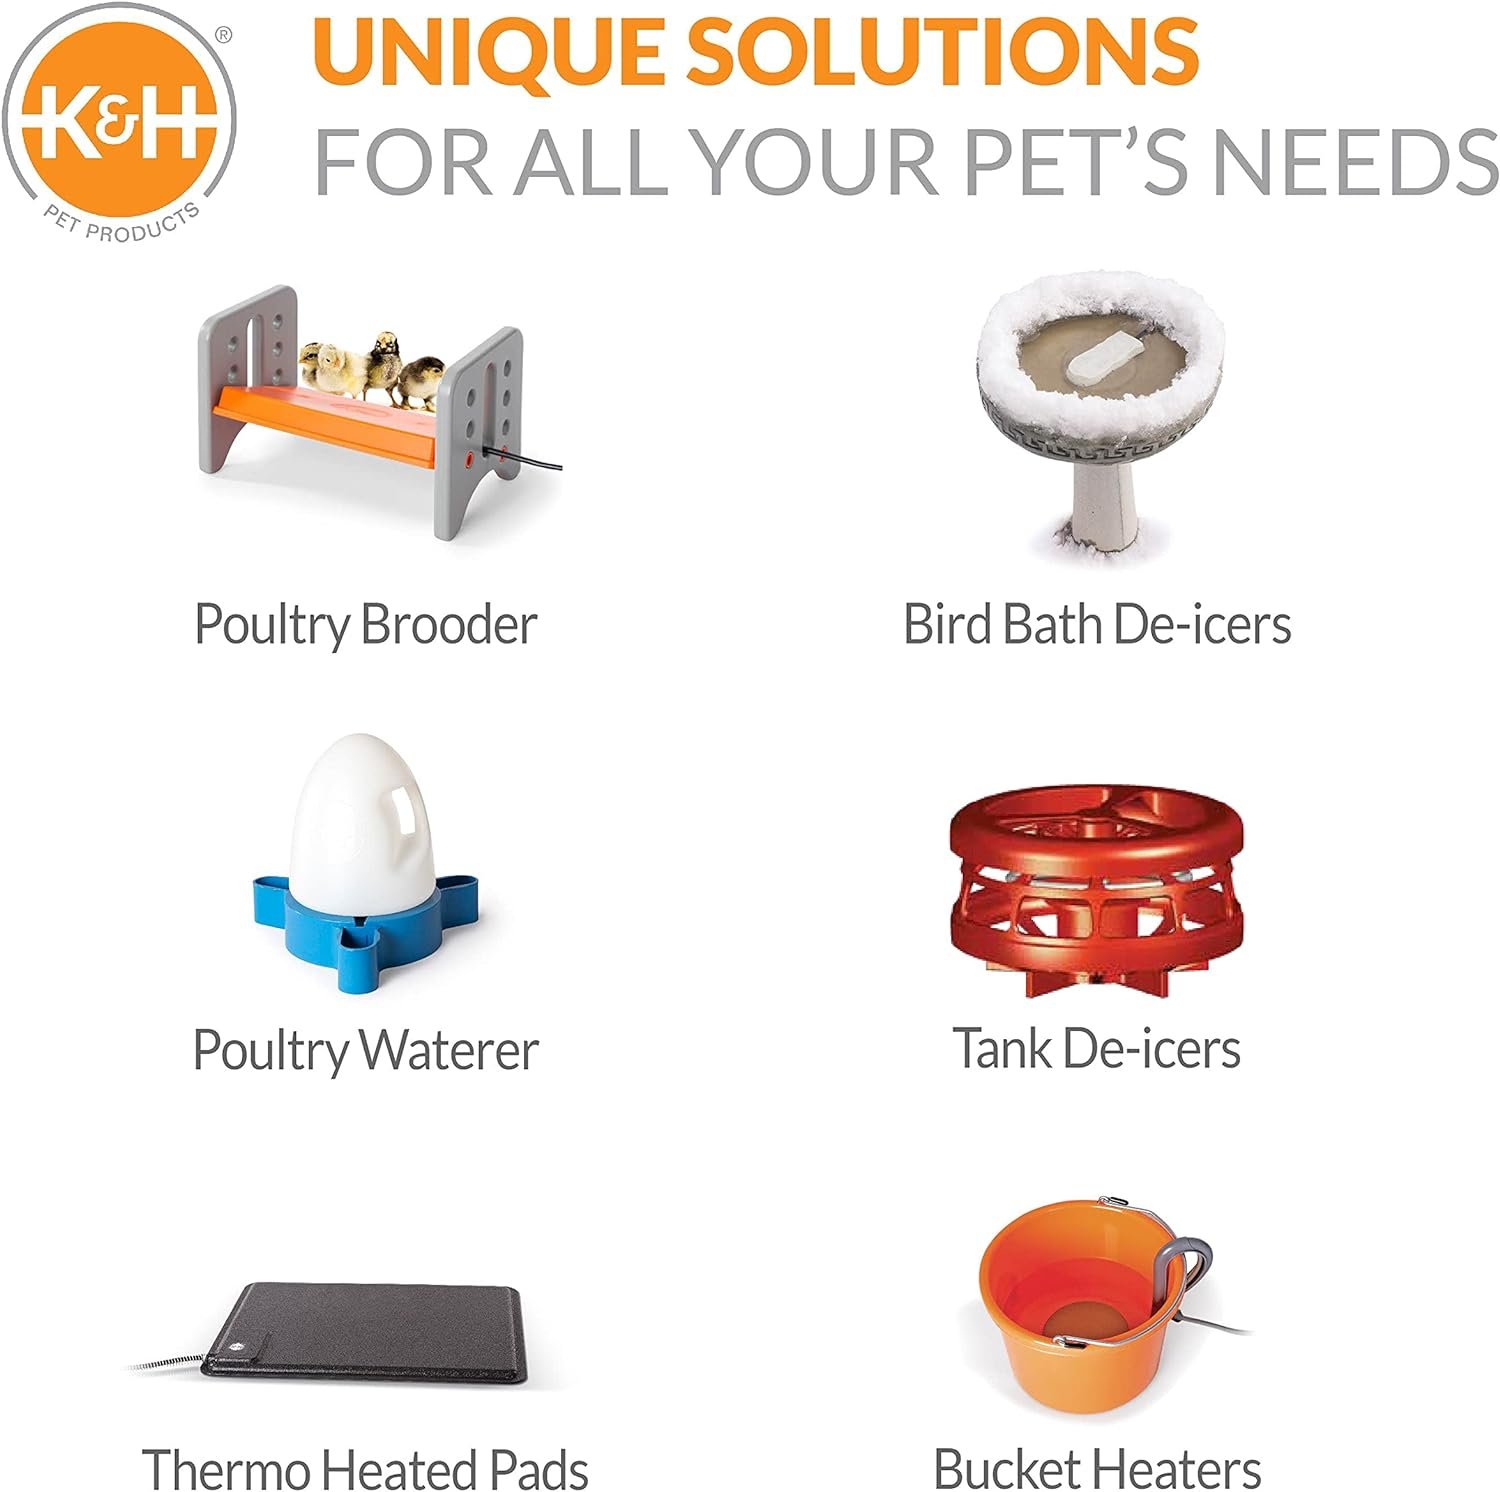 KH Pet Products Thermo Chicken Brooder, Brooder Heater for Chicks, Chick Brooder Plate, Safe Alternative to Heat Lamp for Chickens - Gray/Orange Small 8 X 13.5 X 8 Inches